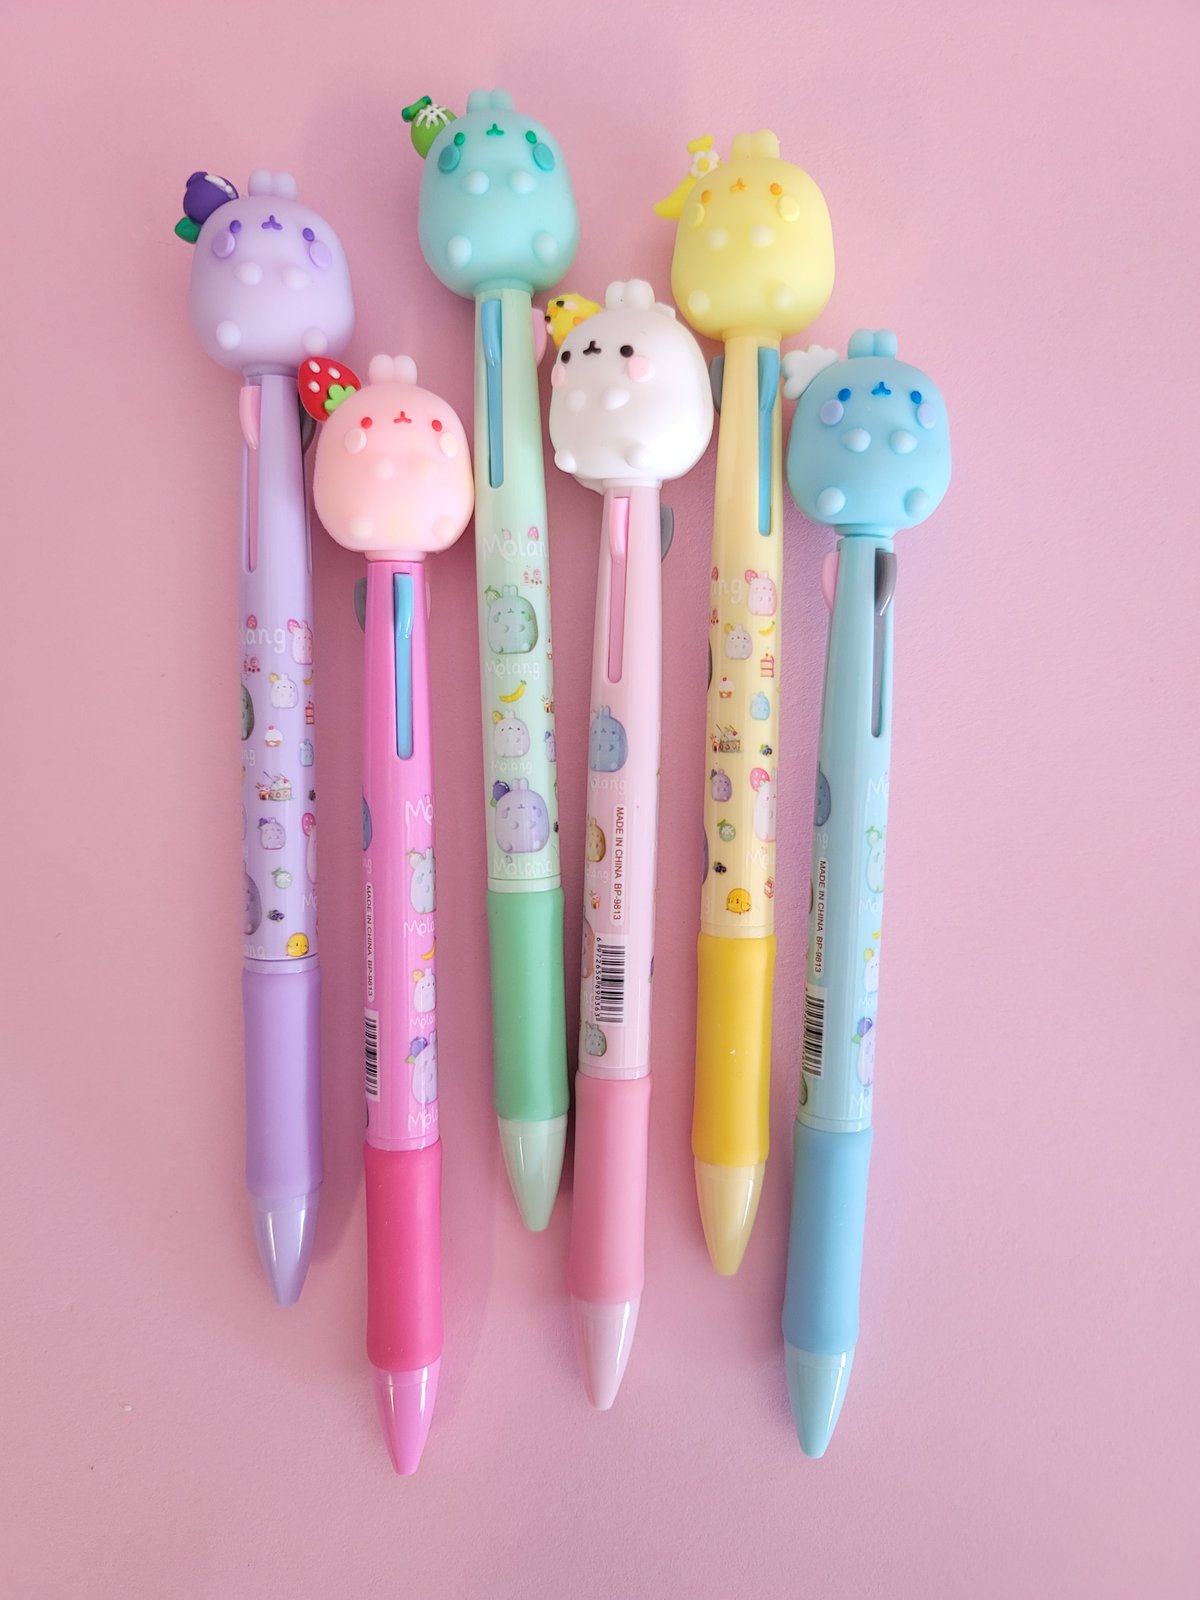 Hello Kitty Pens and Pencils Bundle A mix of pens - Depop